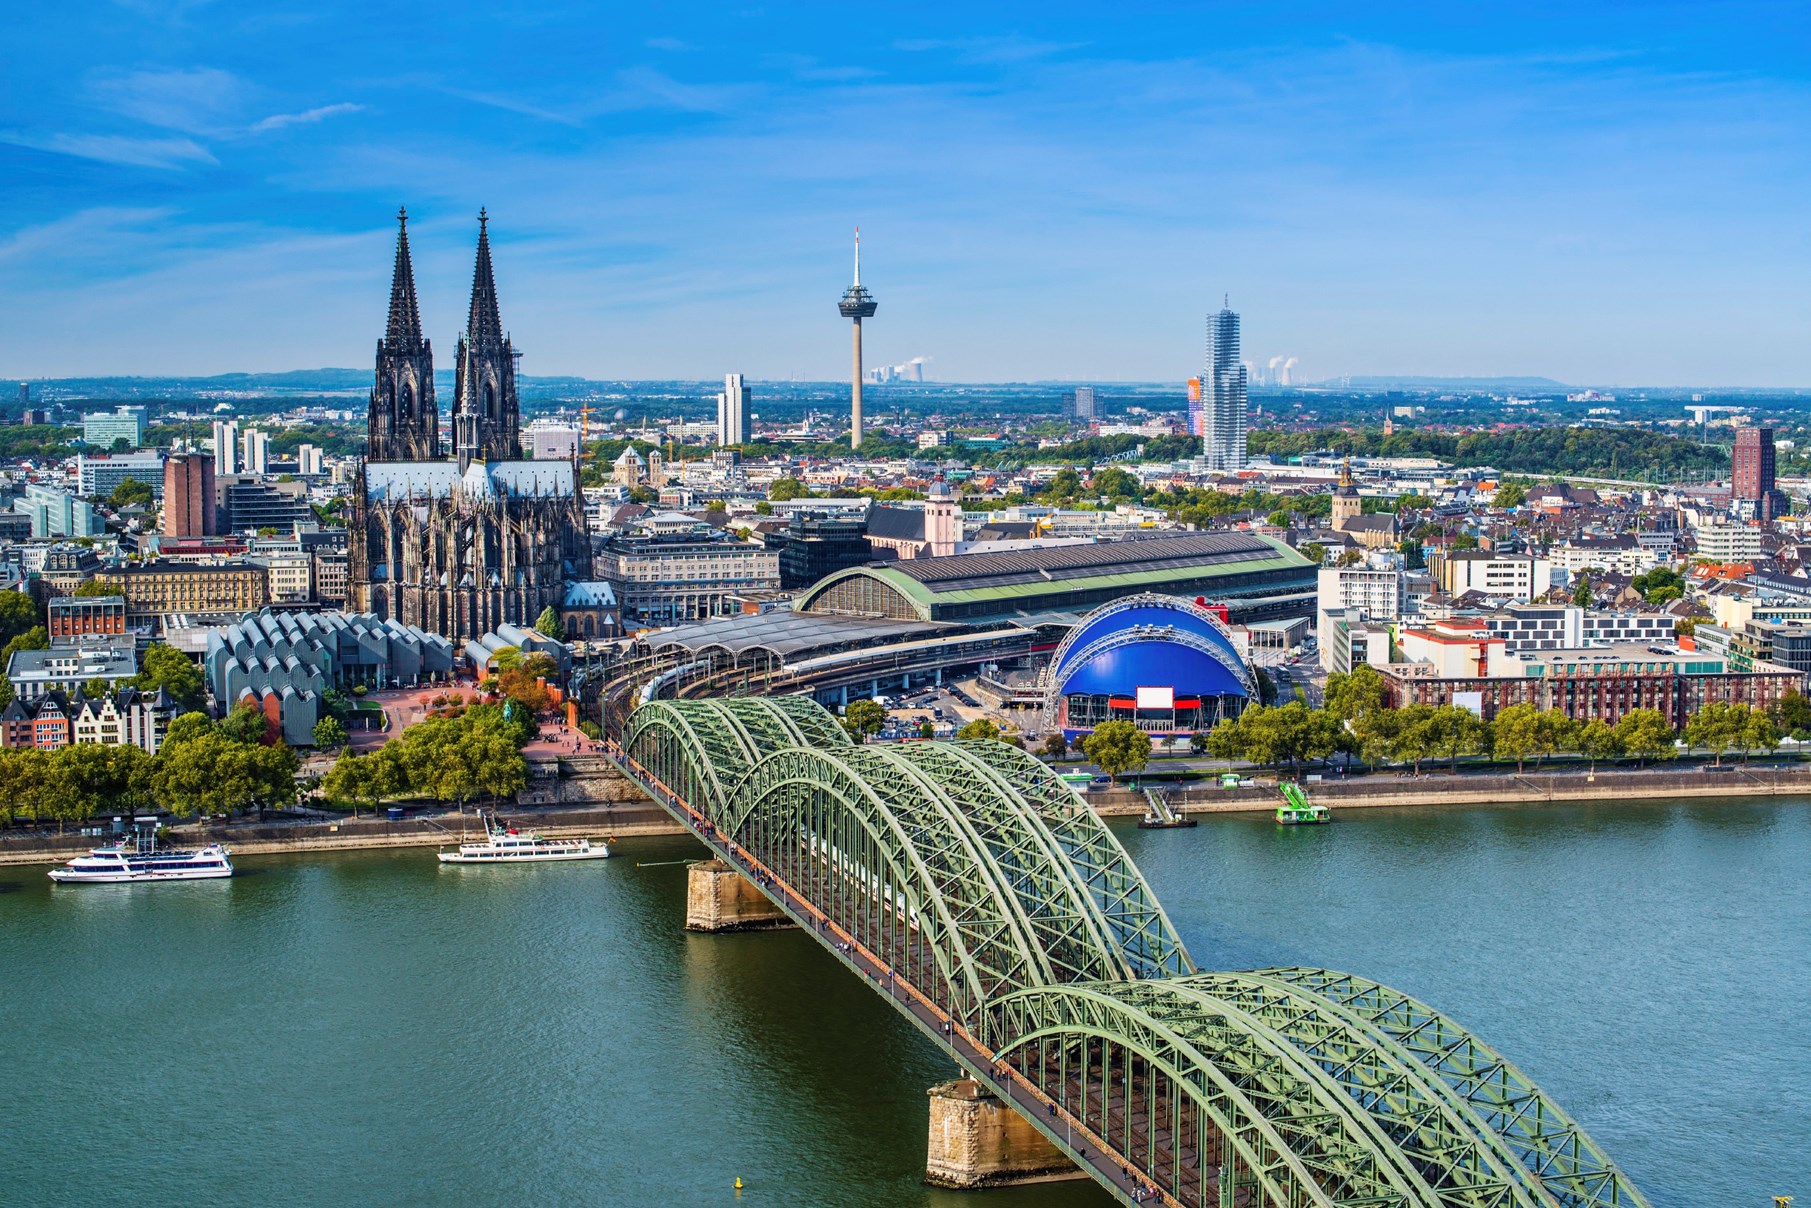 Spend Twixmas in Cologne